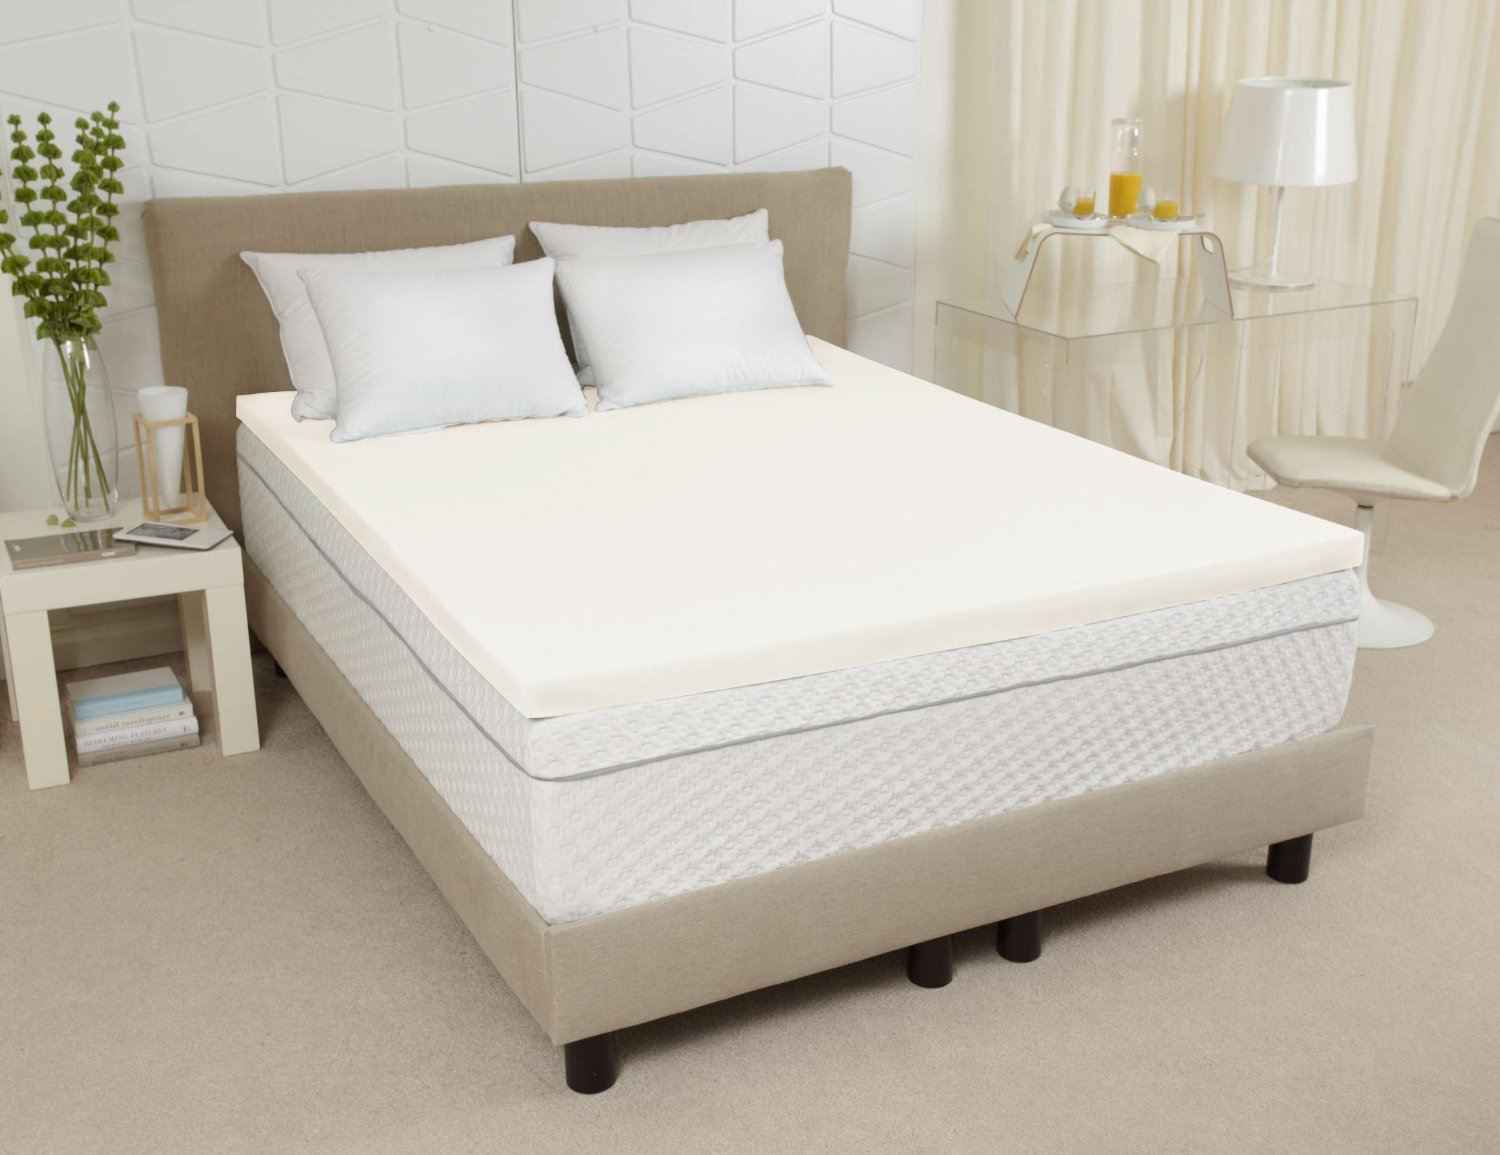 cheapest place to buy memory foam mattress